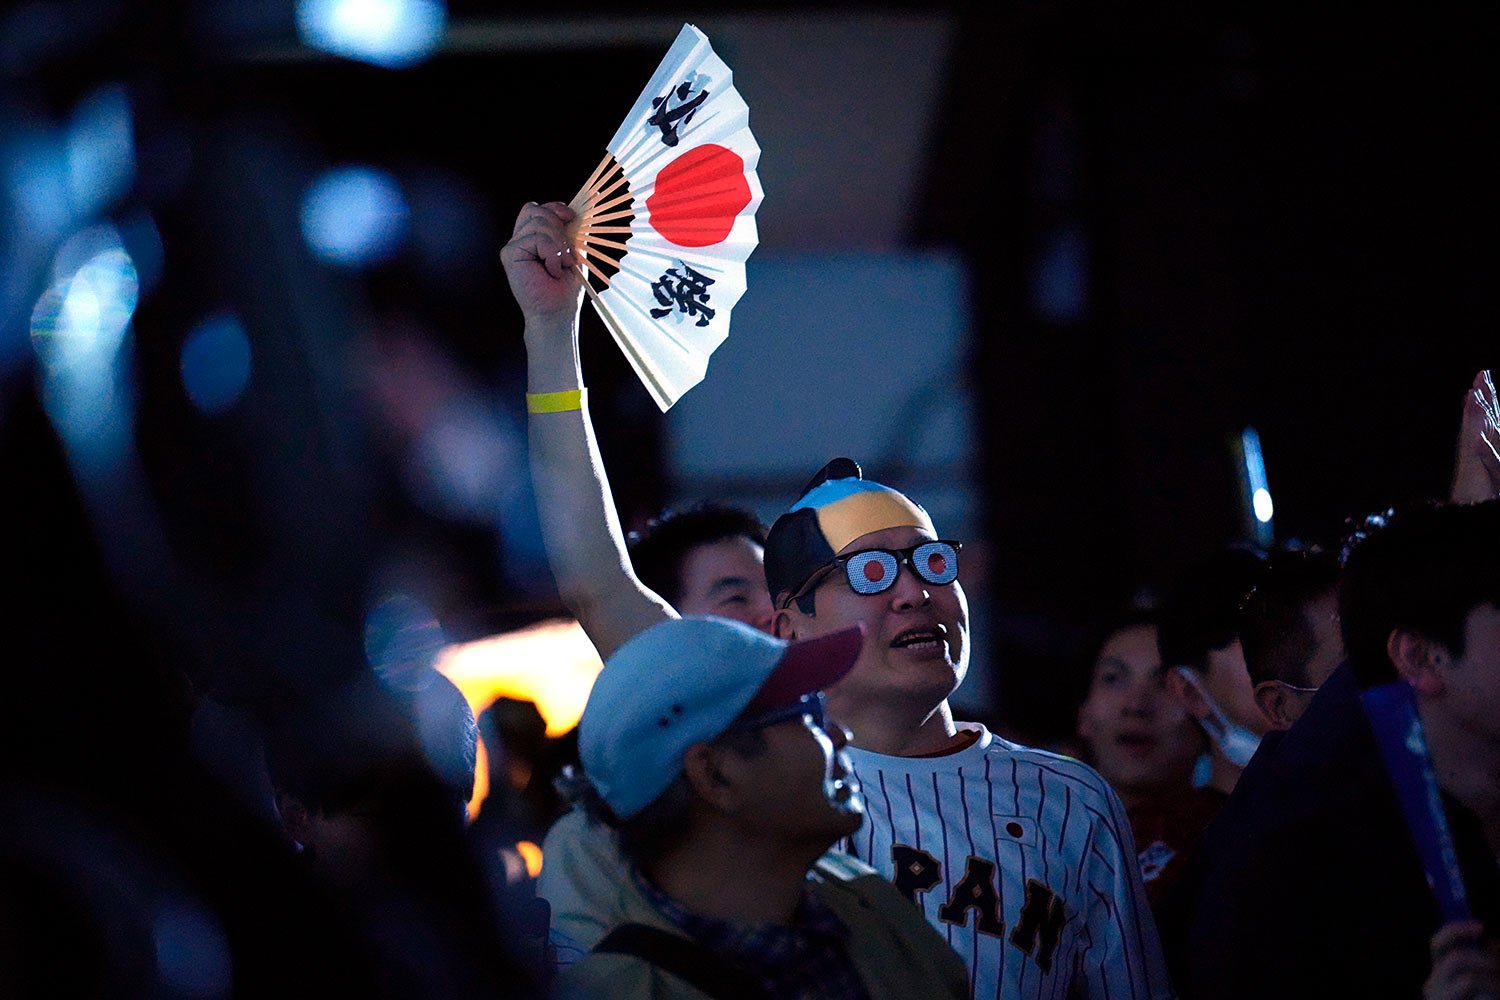  Japan fans react after Japan's Masataka Yoshida hit a home rum in the 7th inning as they watch on a live stream of a World Baseball Classic (WBC) semifinal between Japan and Mexico being played at LoanDepot Park in Miami, during a public viewing eve